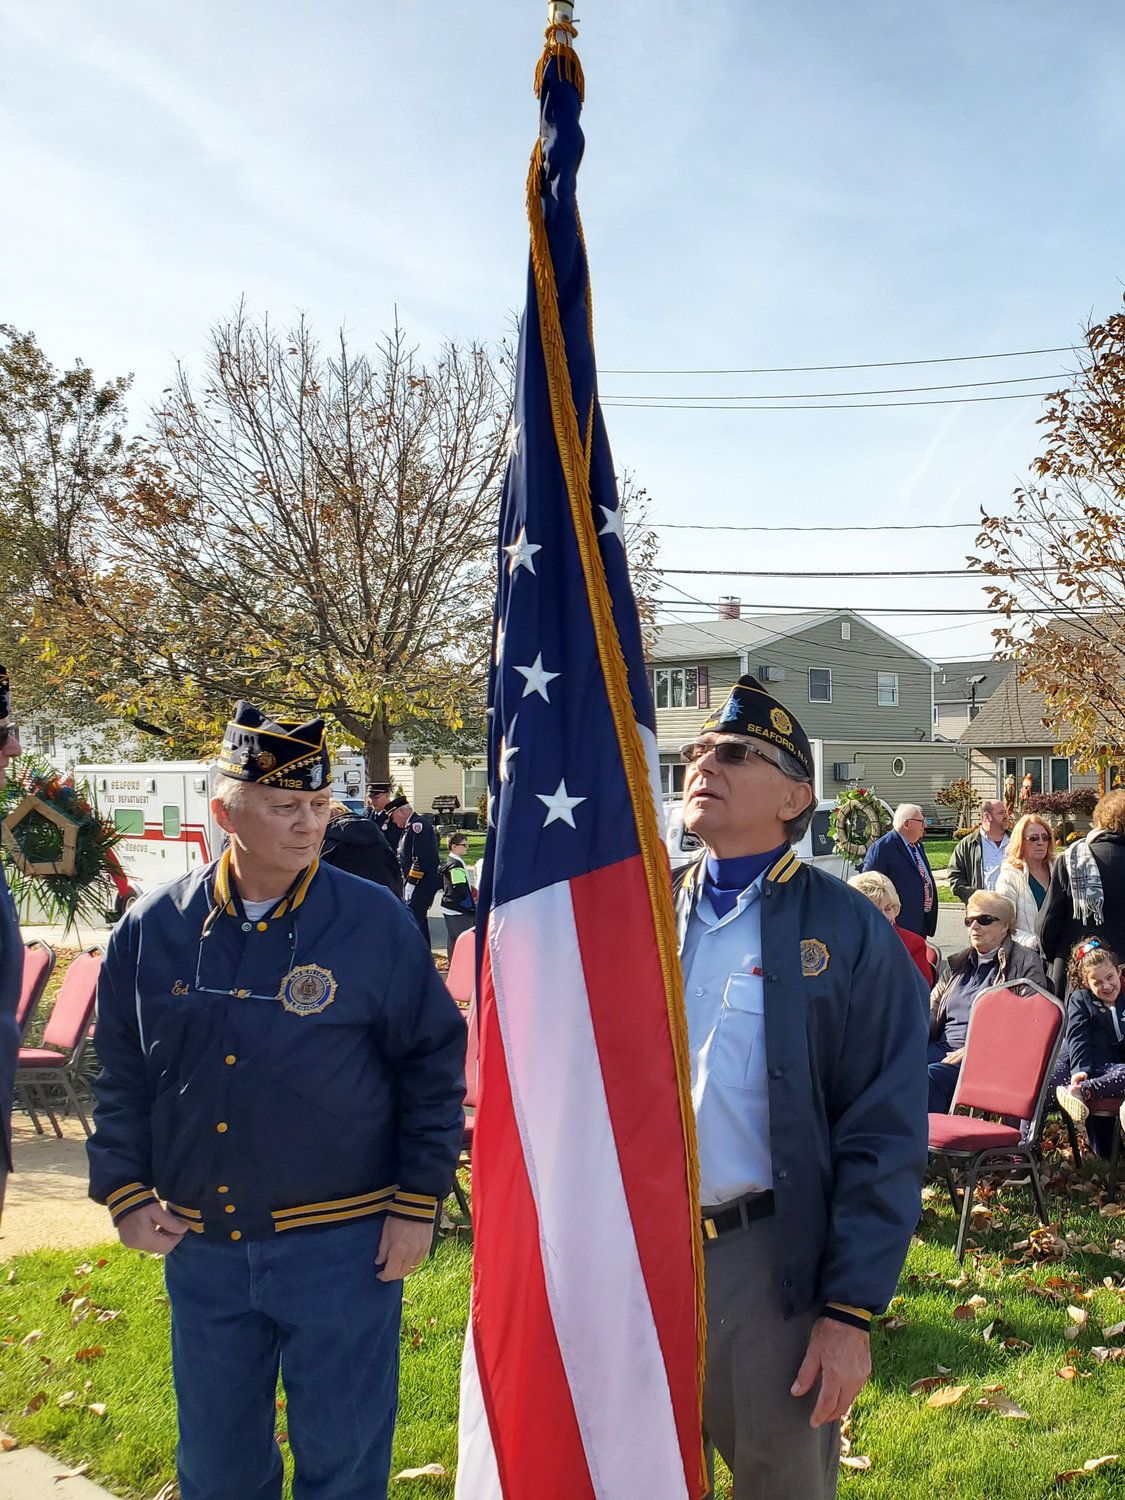 The American flag was erected near the front lawn for the Veterans Day ceremony.